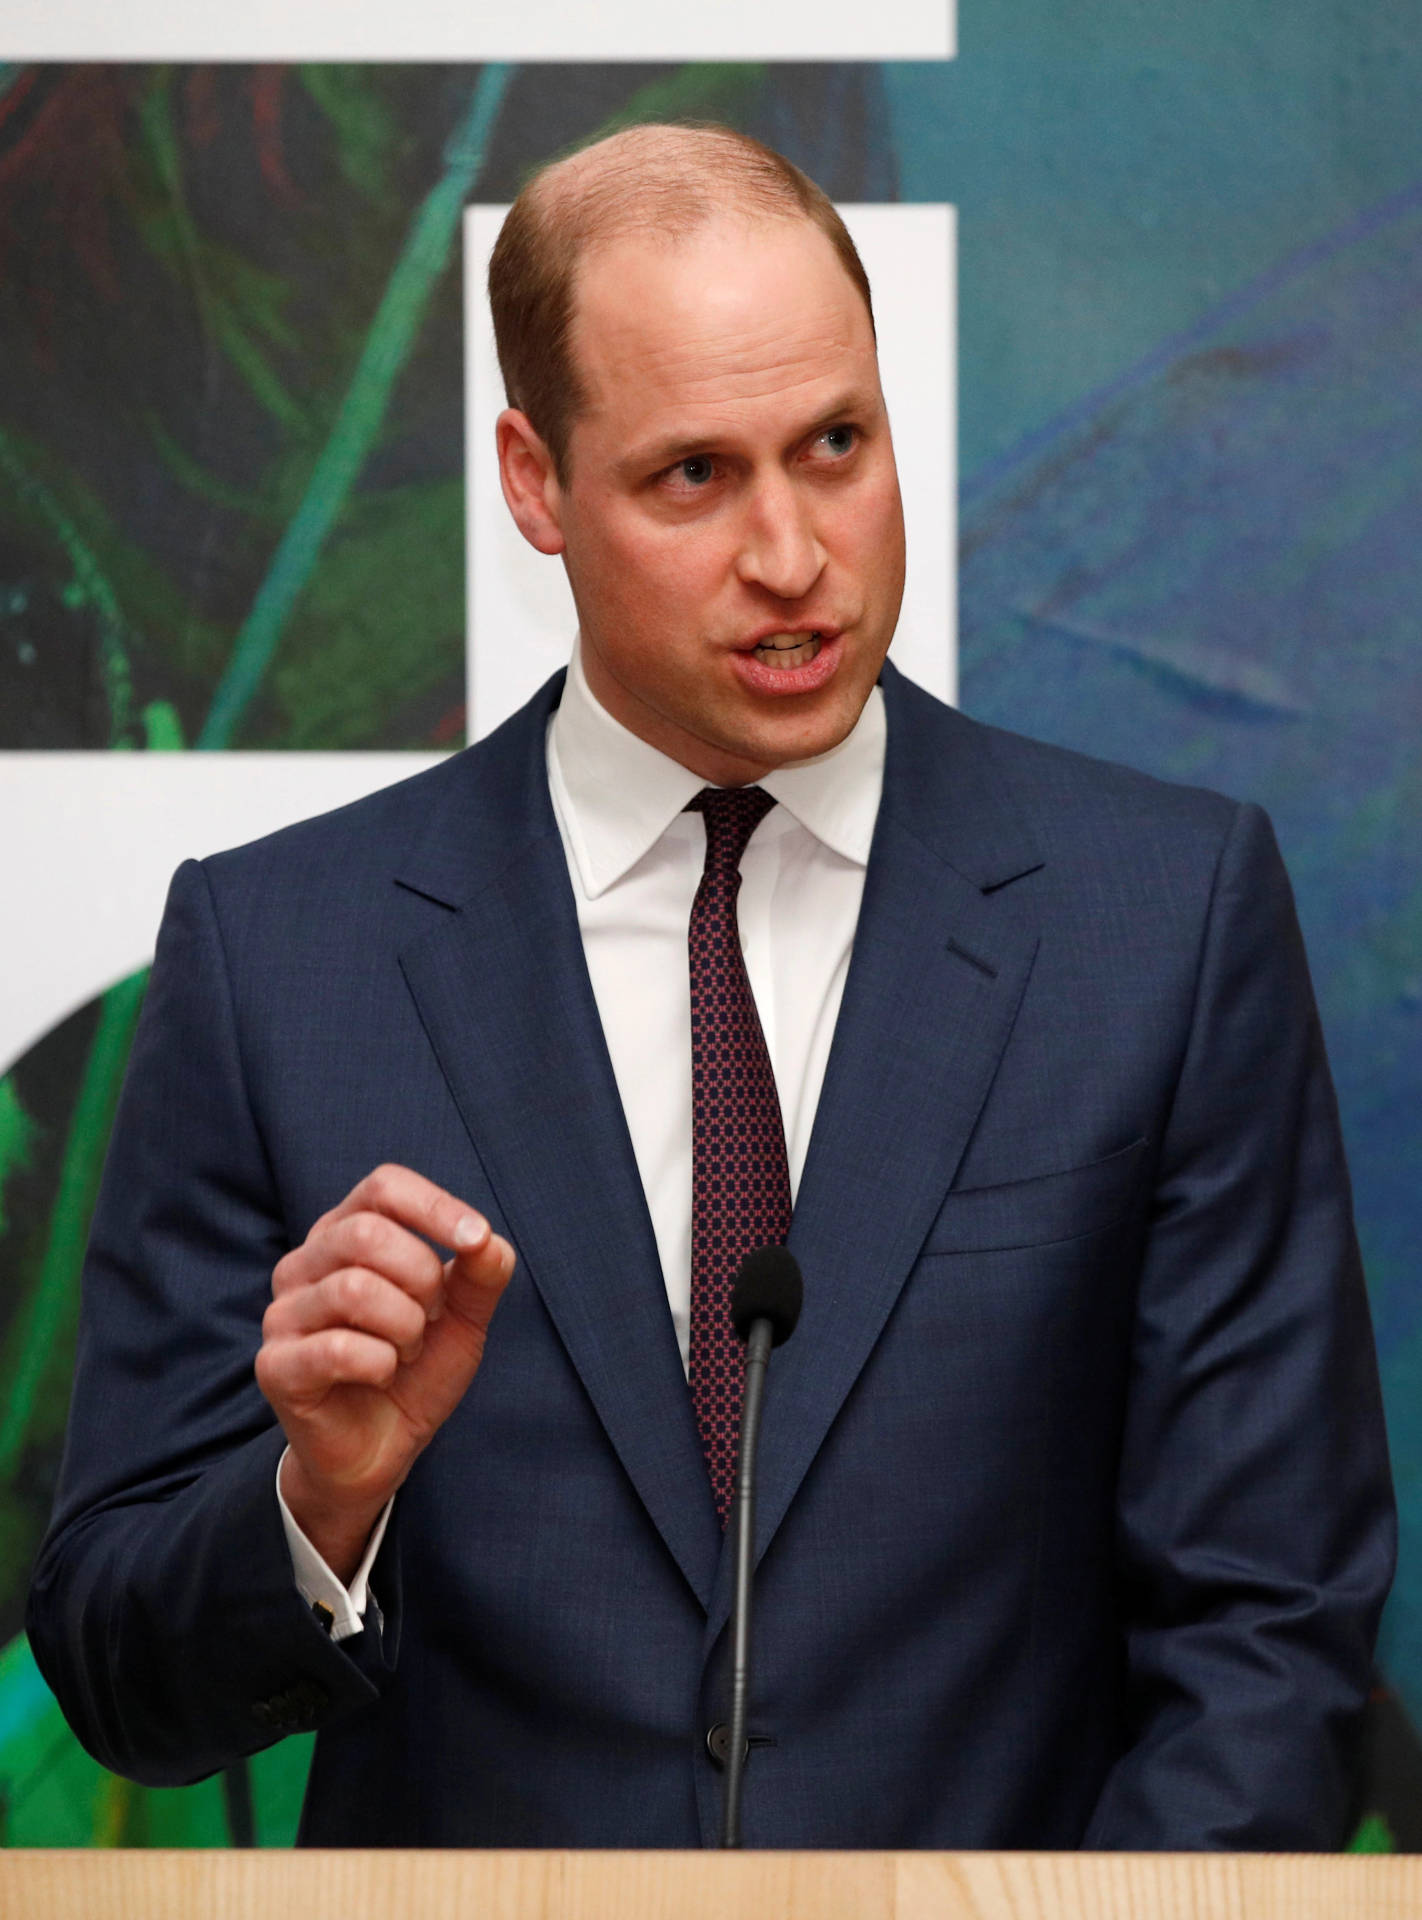 Prince William Addressing An Audience. Background